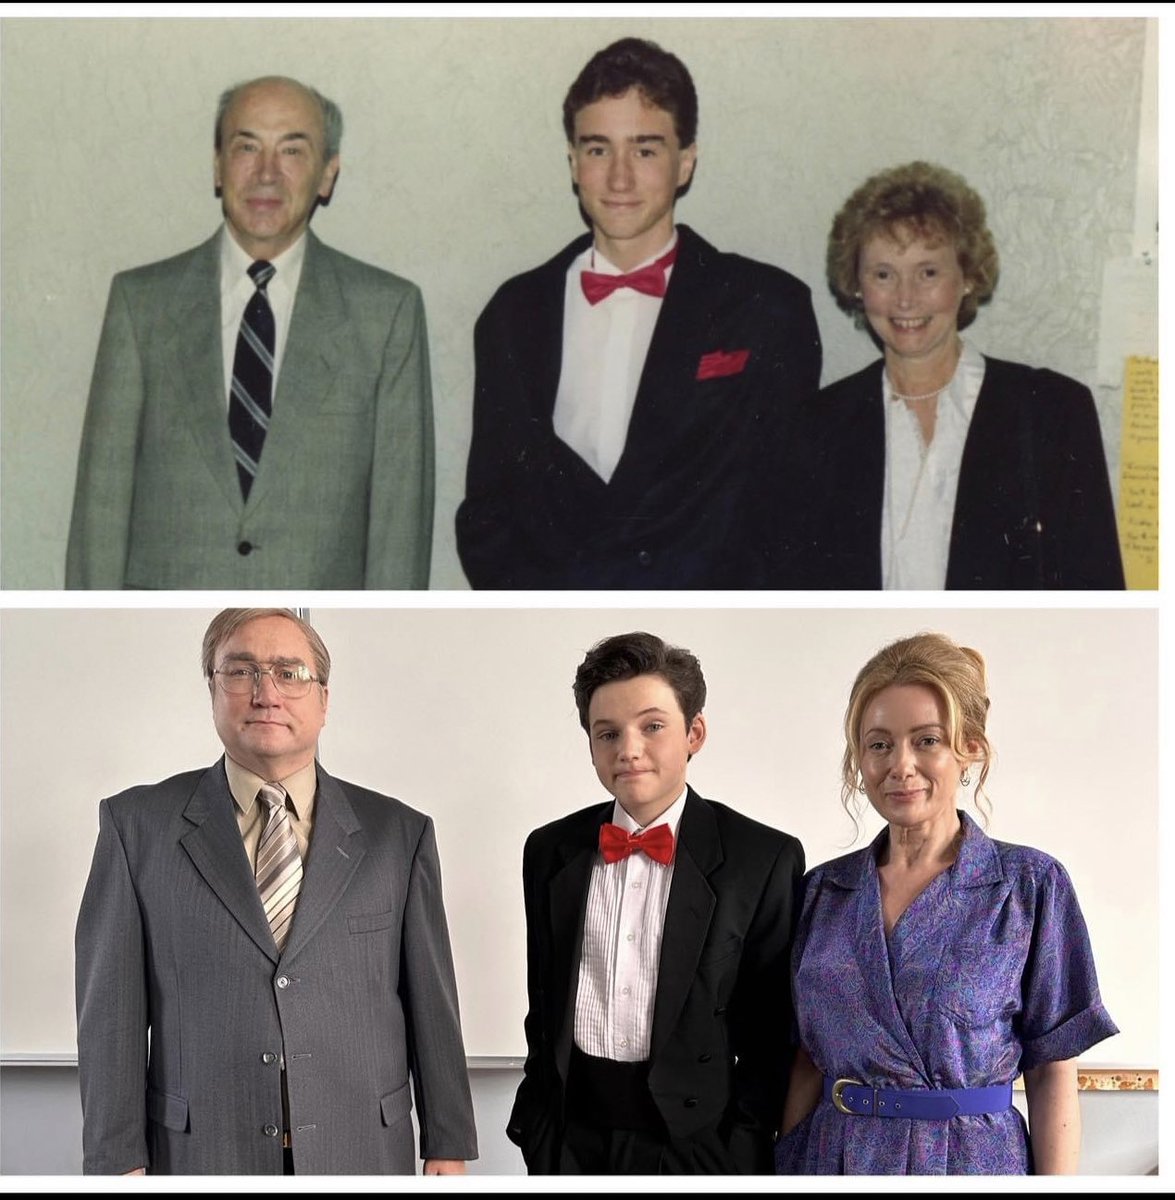 Tomorrow night it’s the season finale of Son of A Critch. Mark graduates from junior high. There’s a lot of change in this episode. It’s all based around the very real speech I gave when I graduated in grade nine. Our team even matched the Randy River tux I wore! #sonofacritch